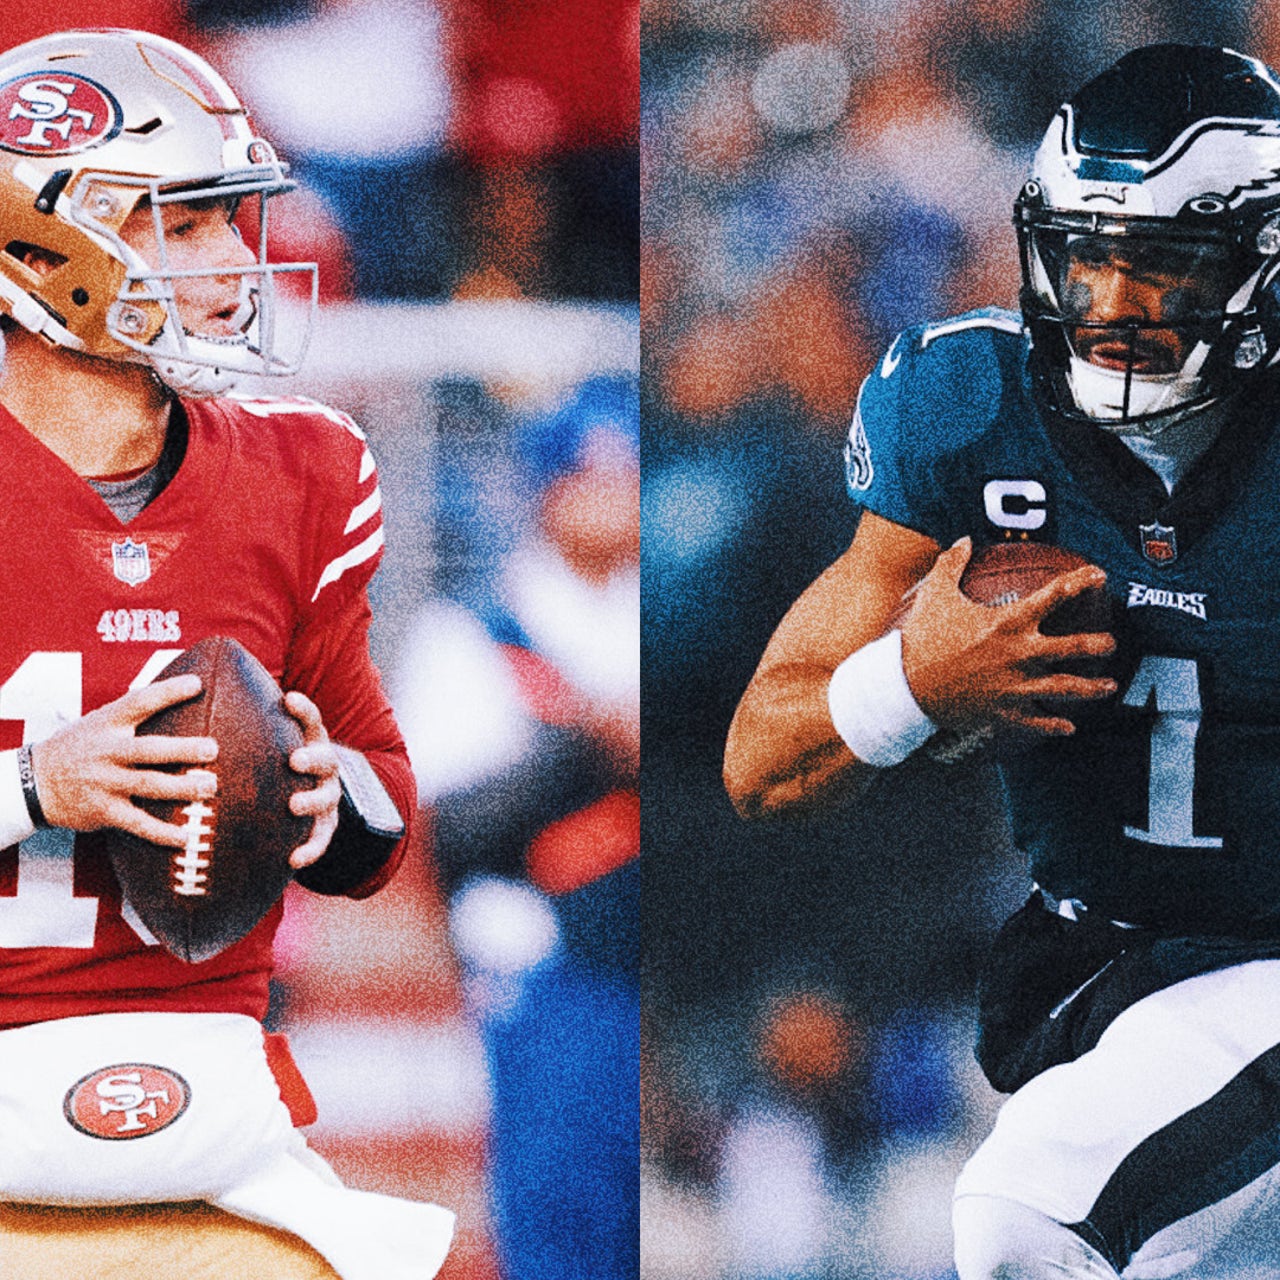 49ers vs. Eagles: Who has the edge in NFC title game matchup